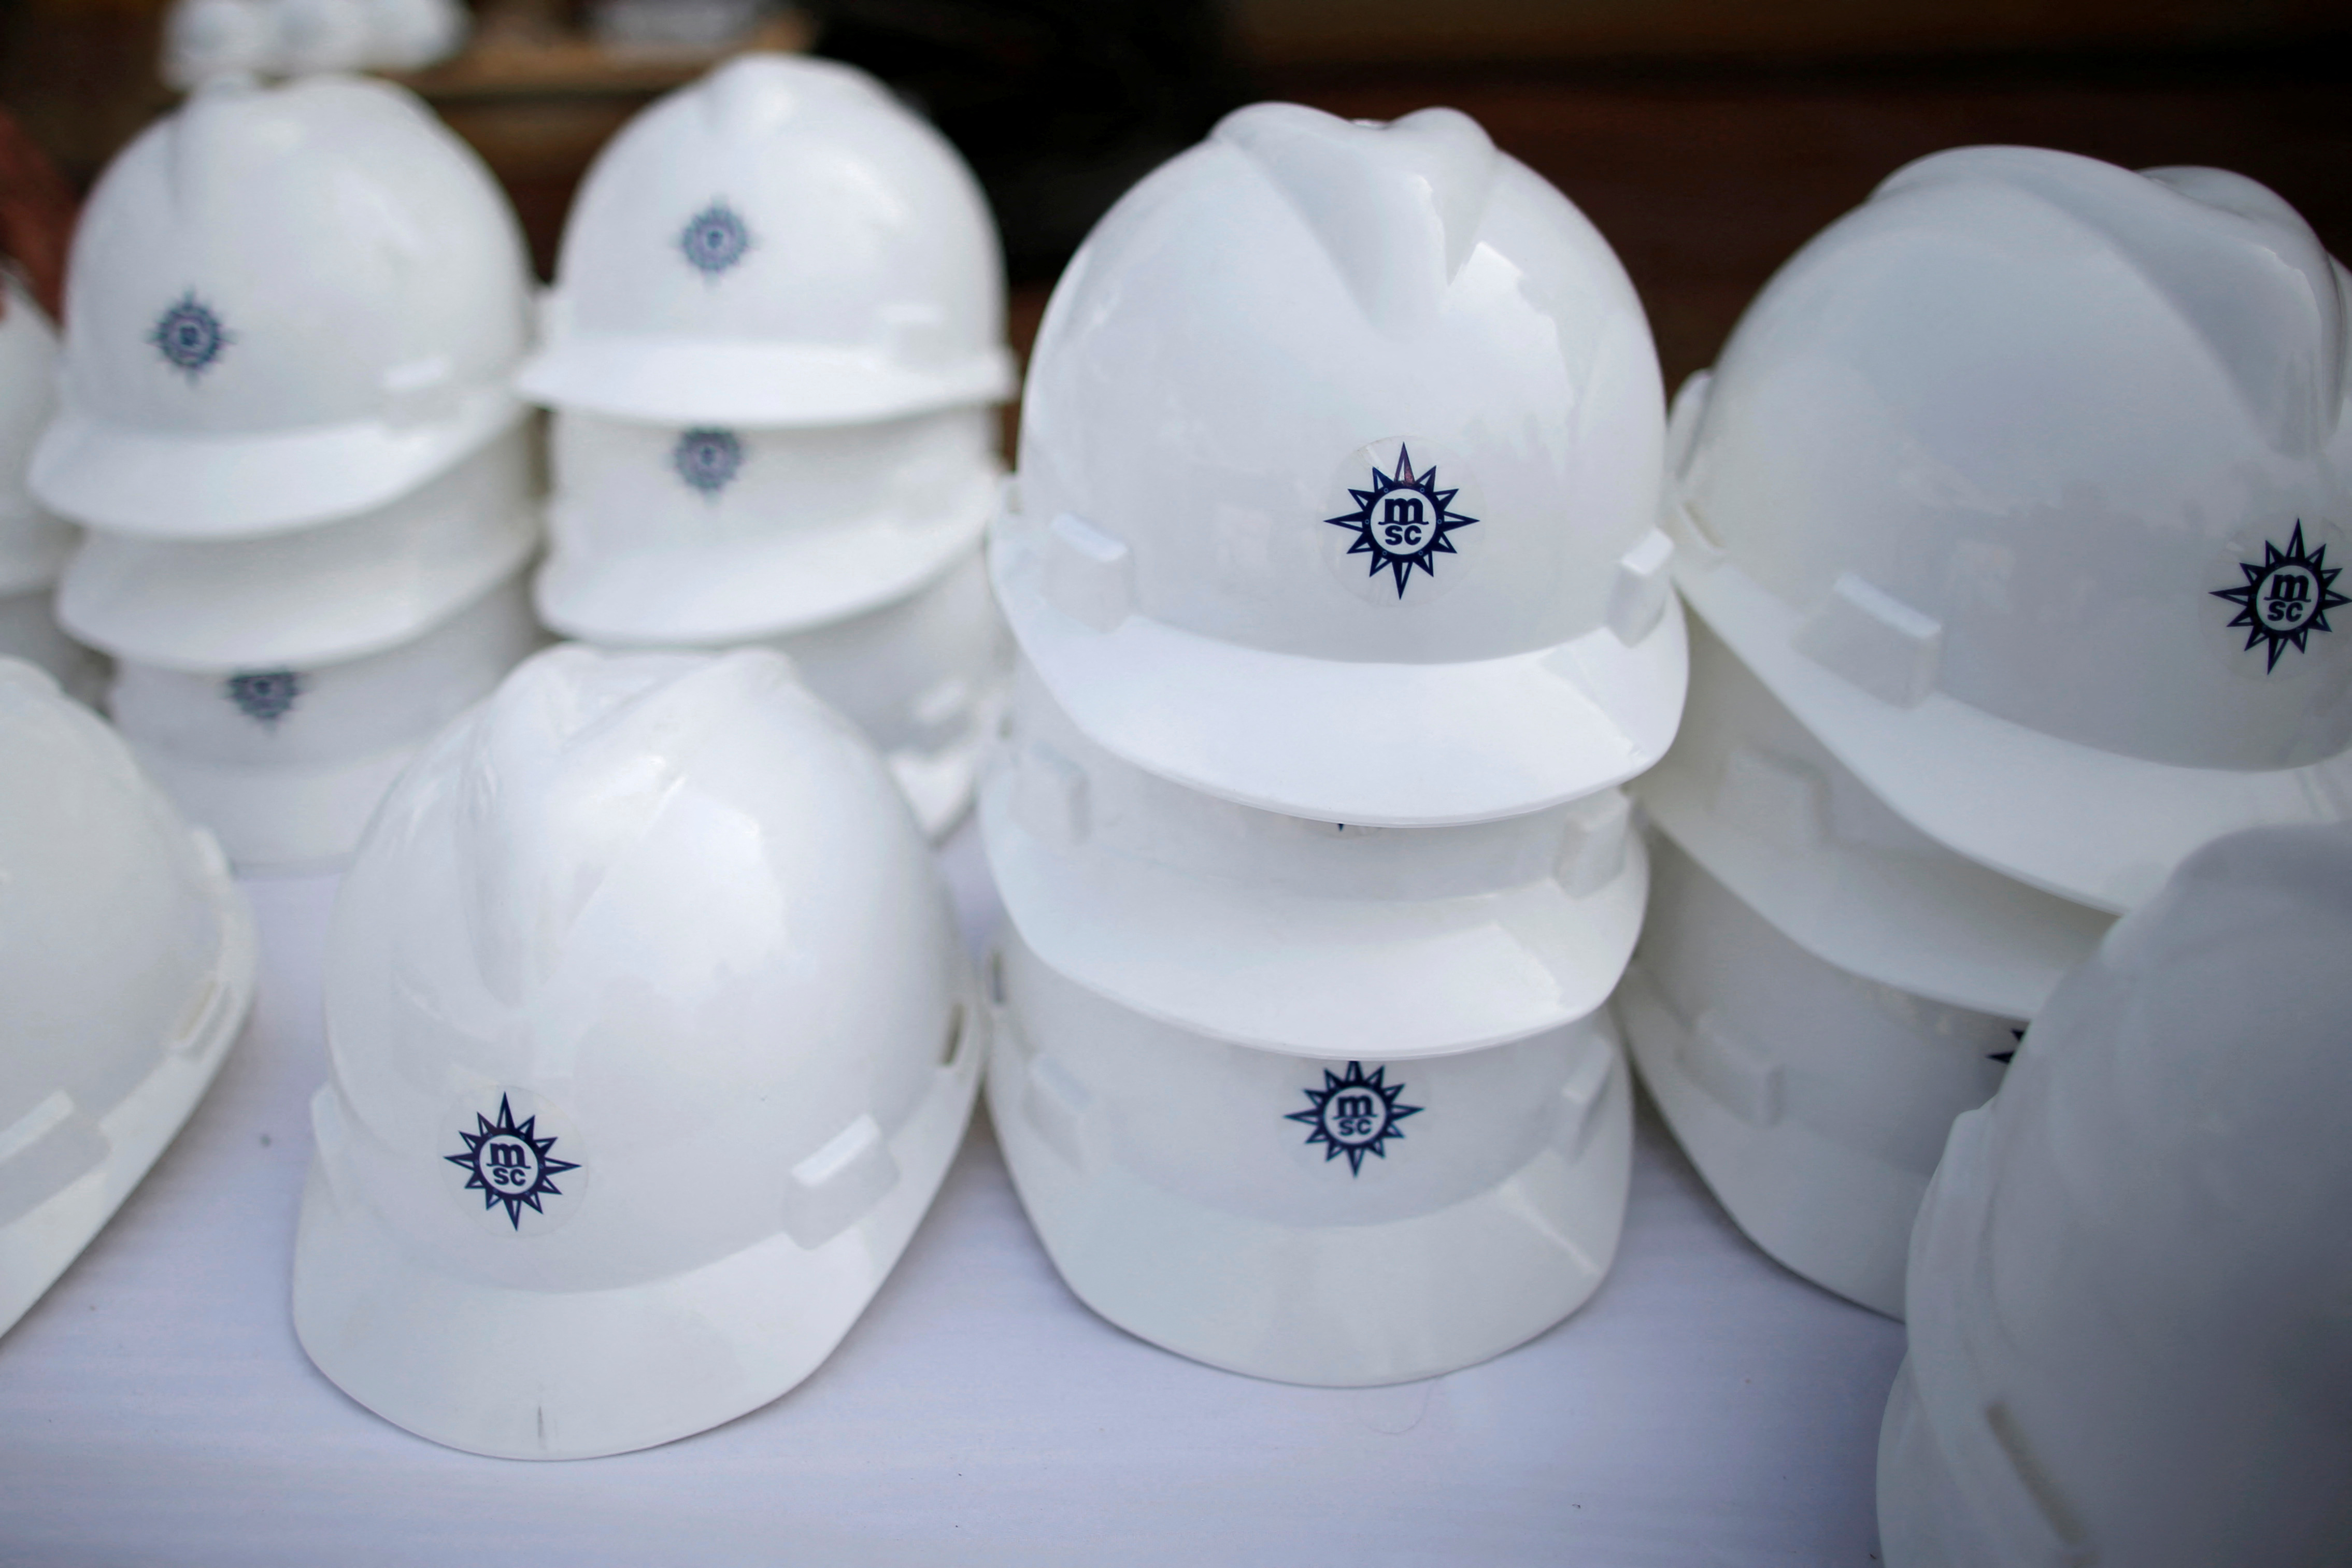 The MSC logo is pictured on working helmet during a press visit of the MSC Meraviglia class ship at the STX Les Chantiers de l'Atlantique shipyard site in Saint-Nazaire